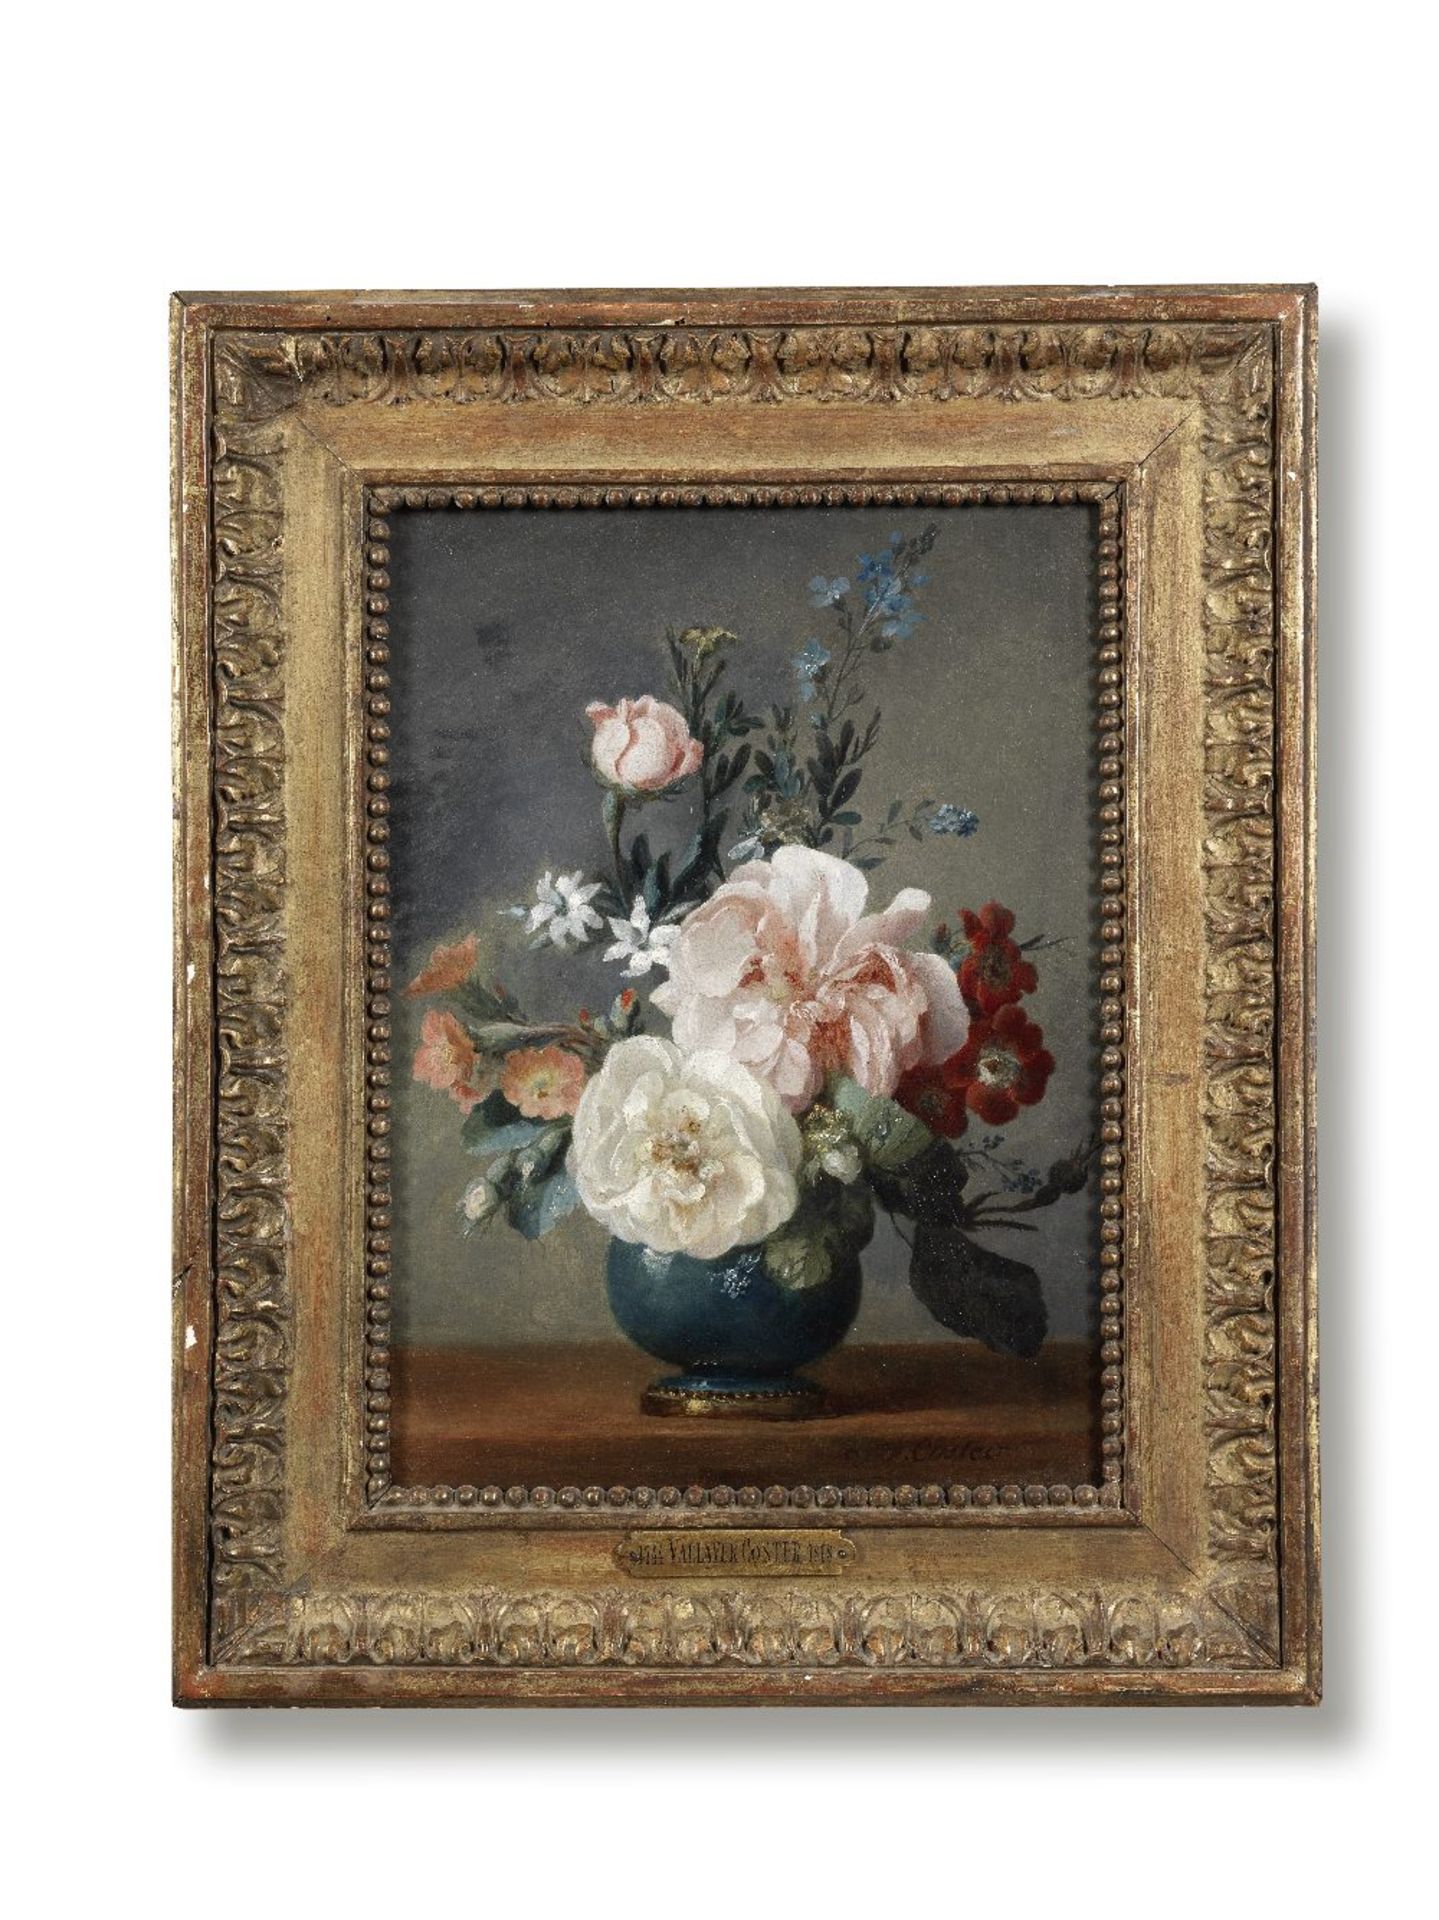 Anne Vallayer-Coster (Paris 1744-1818) Roses, orange blossom and other flowers in a blue vase - Image 2 of 3